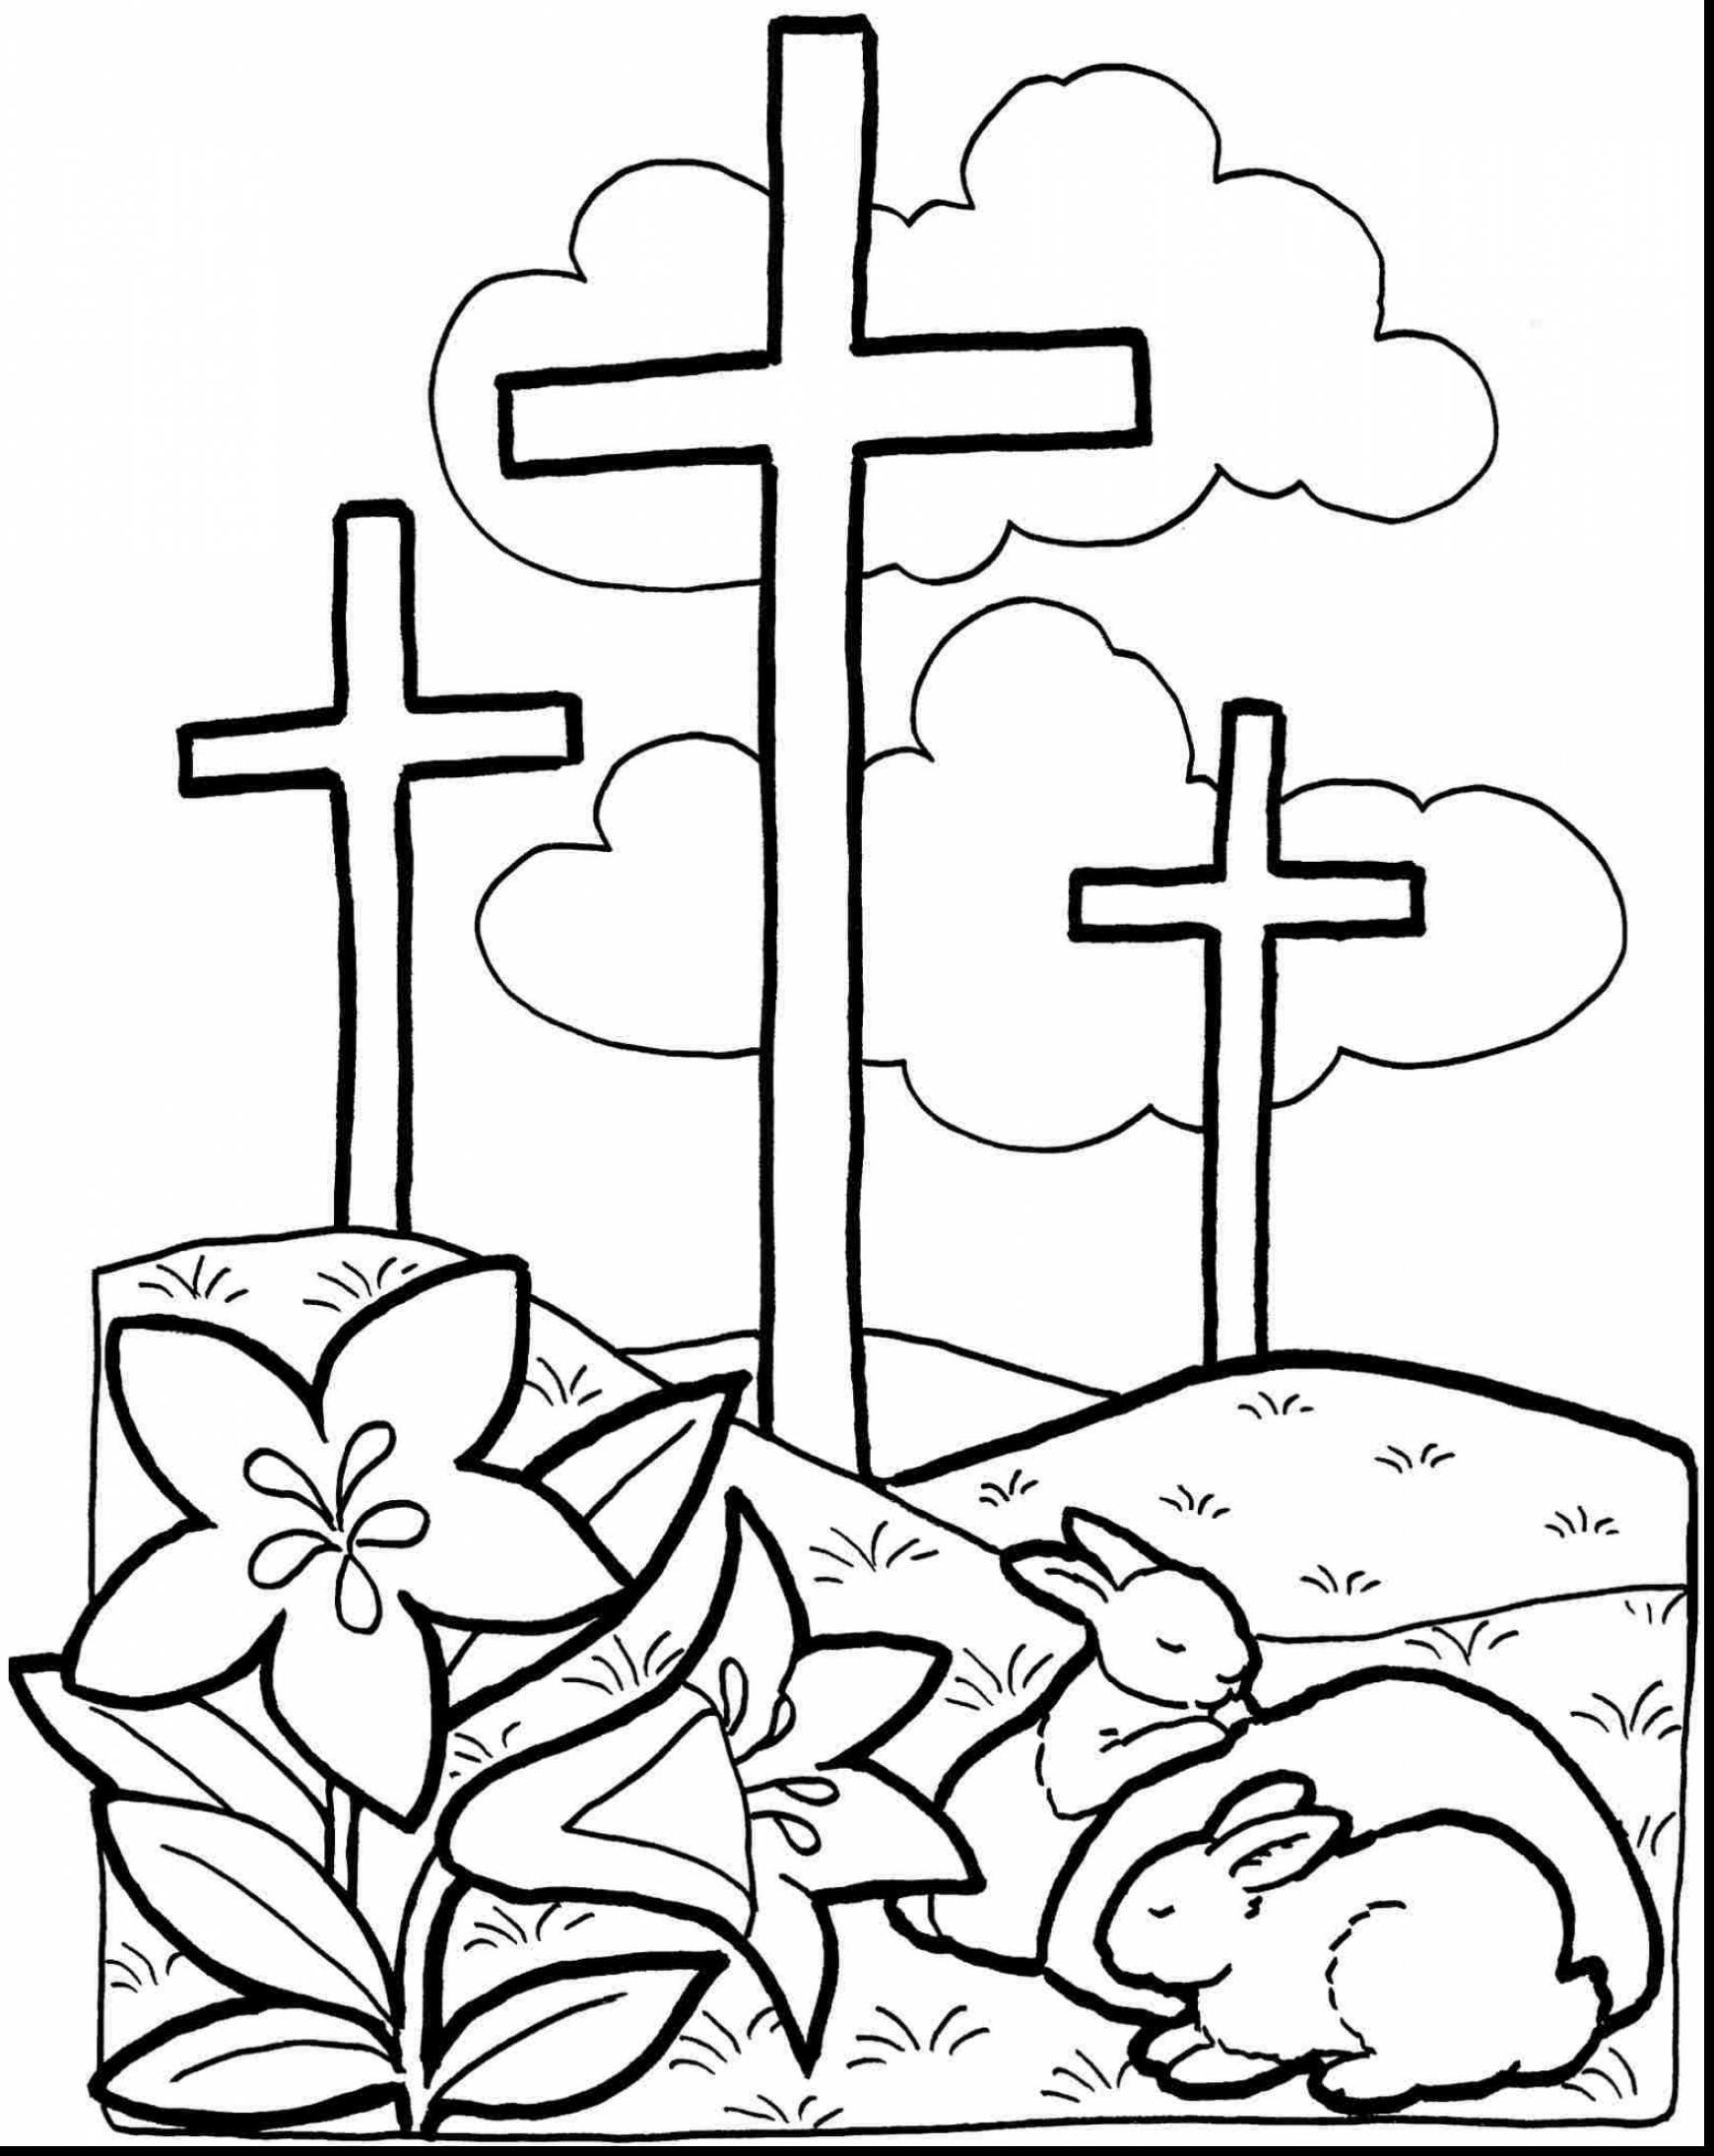 Coloring Pages Of Crosses With Flowers Images Of Free Easter Coloring Pages Religious Sabadaphnecottage